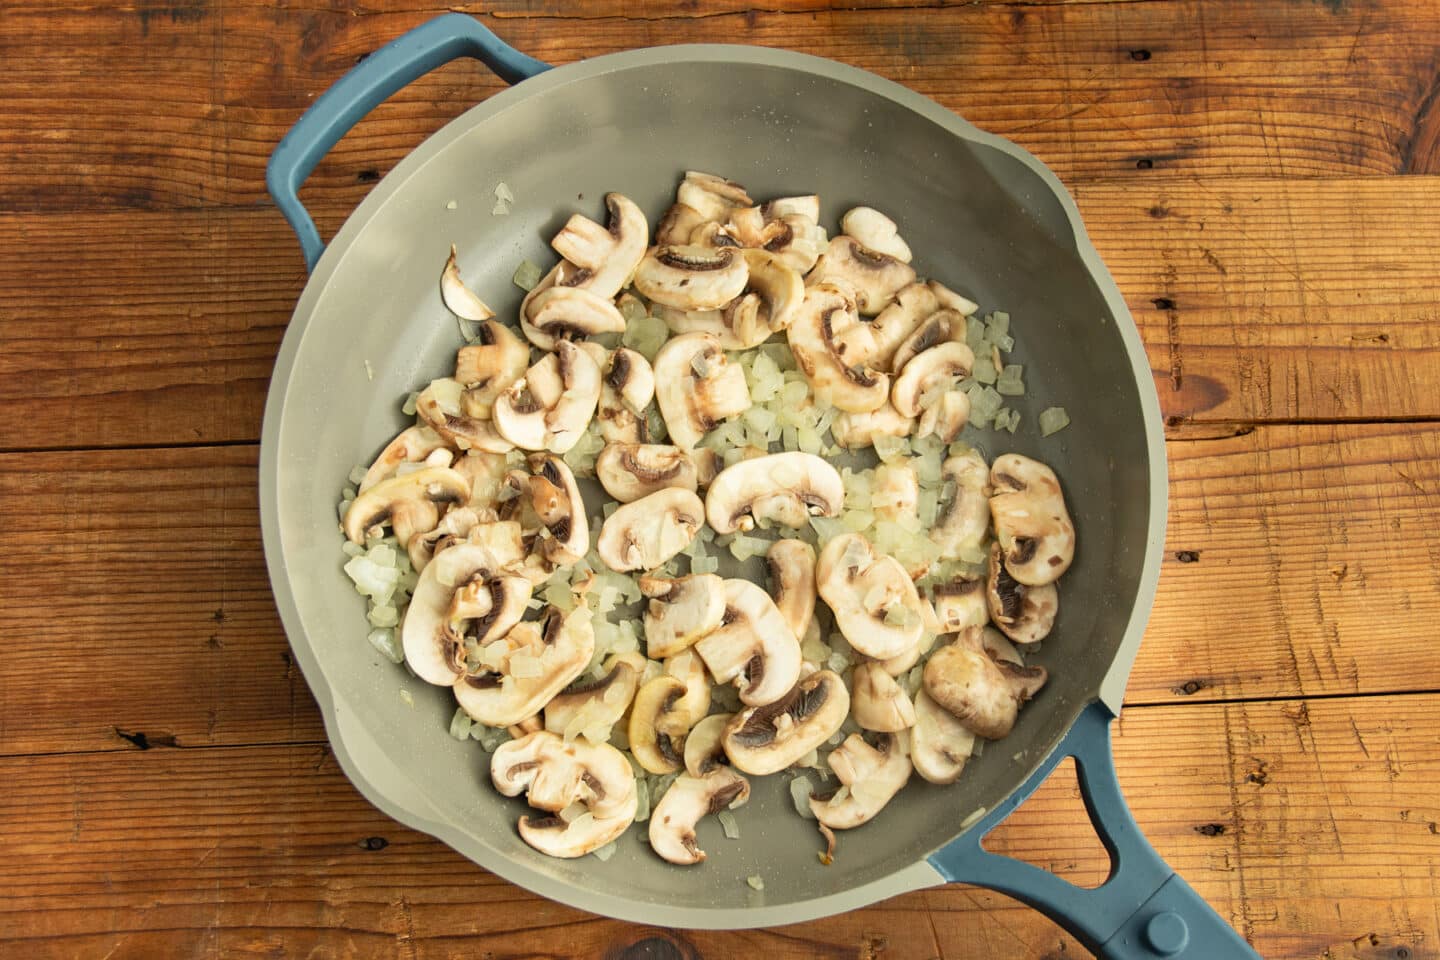 This is a picture of a skillet with onion and mushrooms cooking.